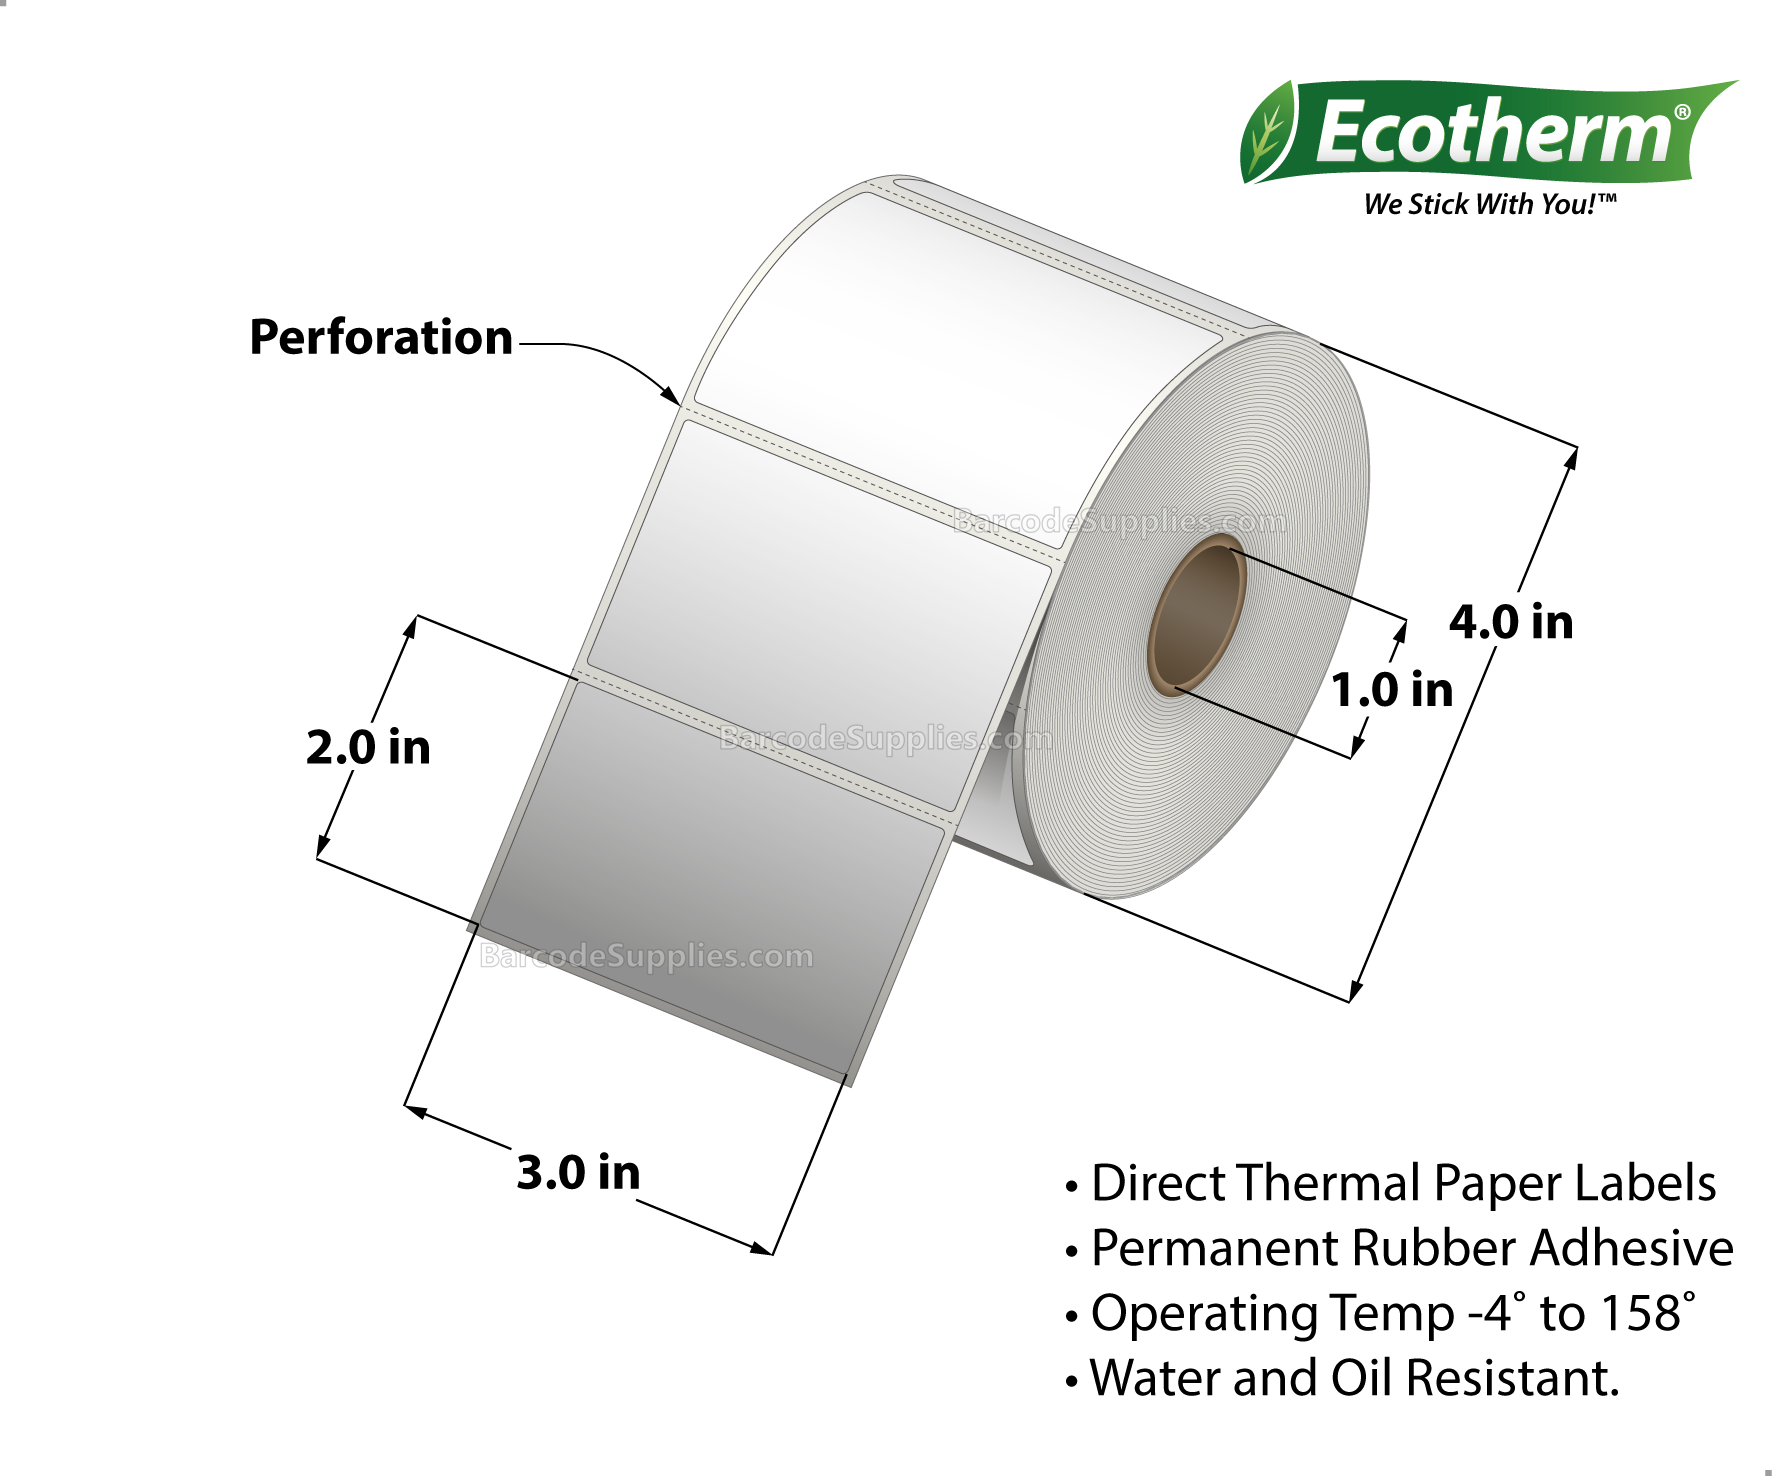 3 x 2 Direct Thermal White Labels With Rubber Adhesive - Perforated - 735 Labels Per Roll - Carton Of 4 Rolls - 2940 Labels Total - MPN: ECOTHERM14109-4